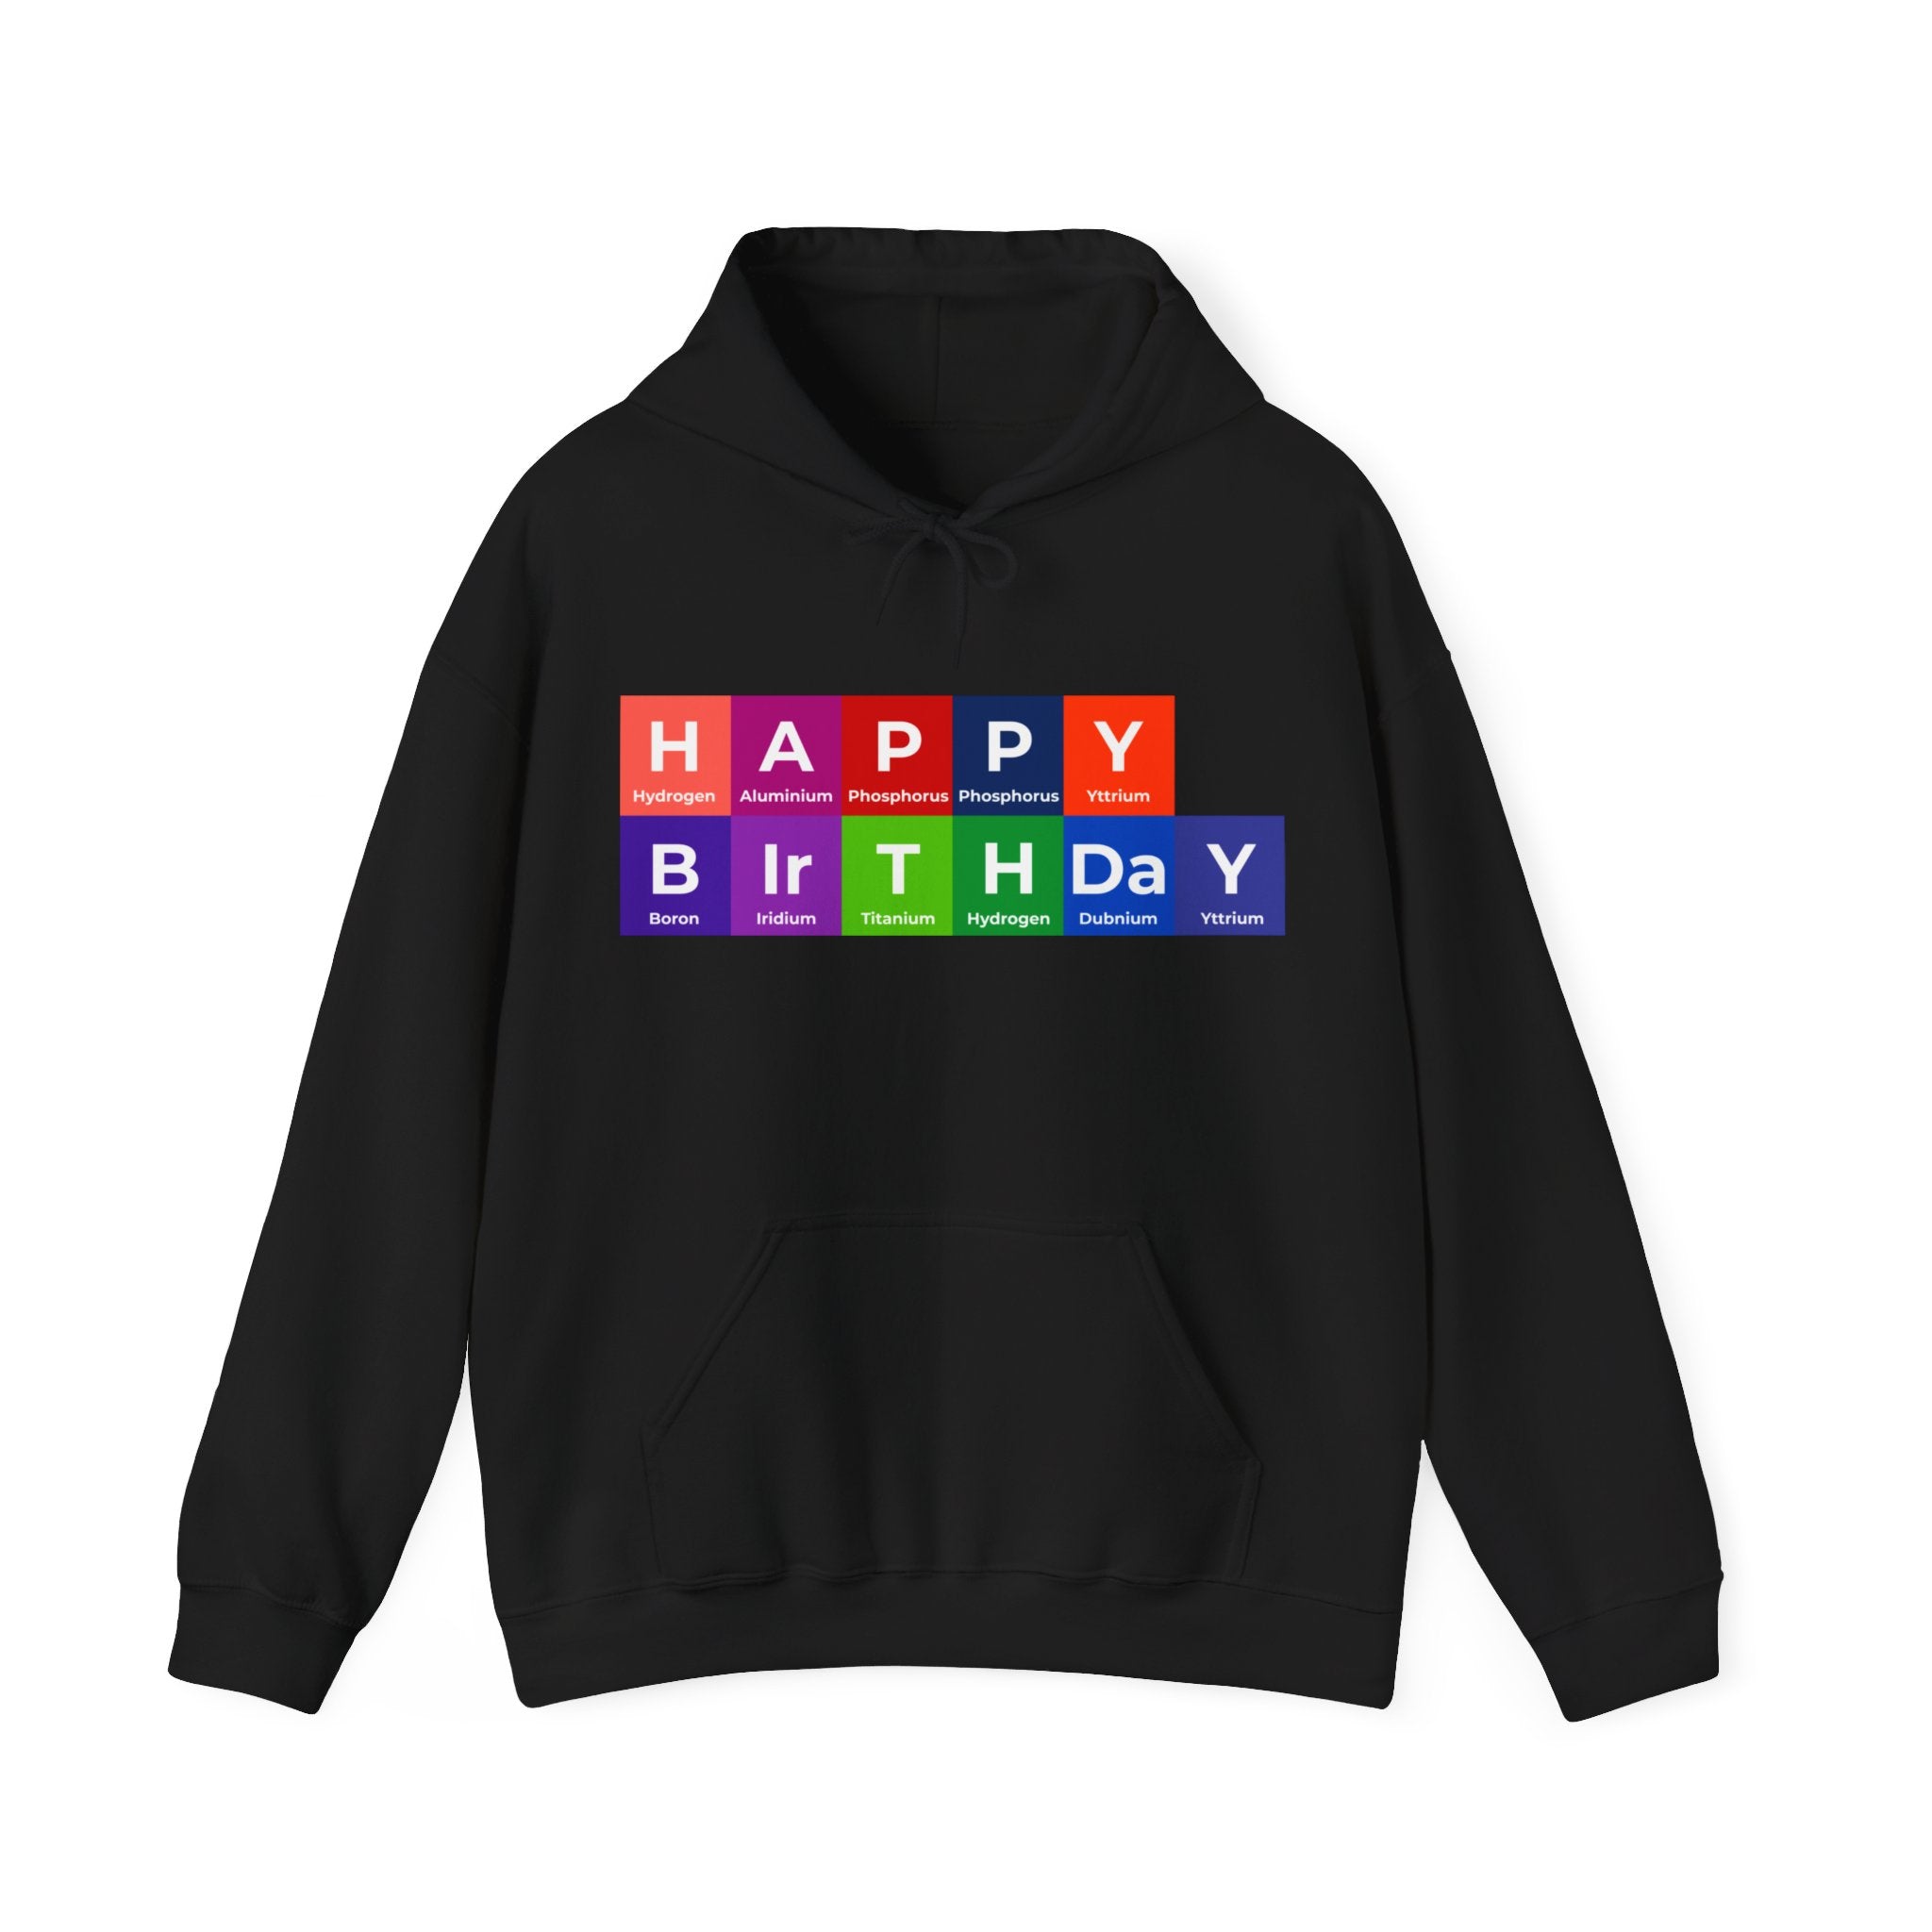 A chic black Happy Birthday - Hooded Sweatshirt featuring a "Happy Birthday" message spelled out using colorful periodic table element symbols for a comfortable yet stylish look.